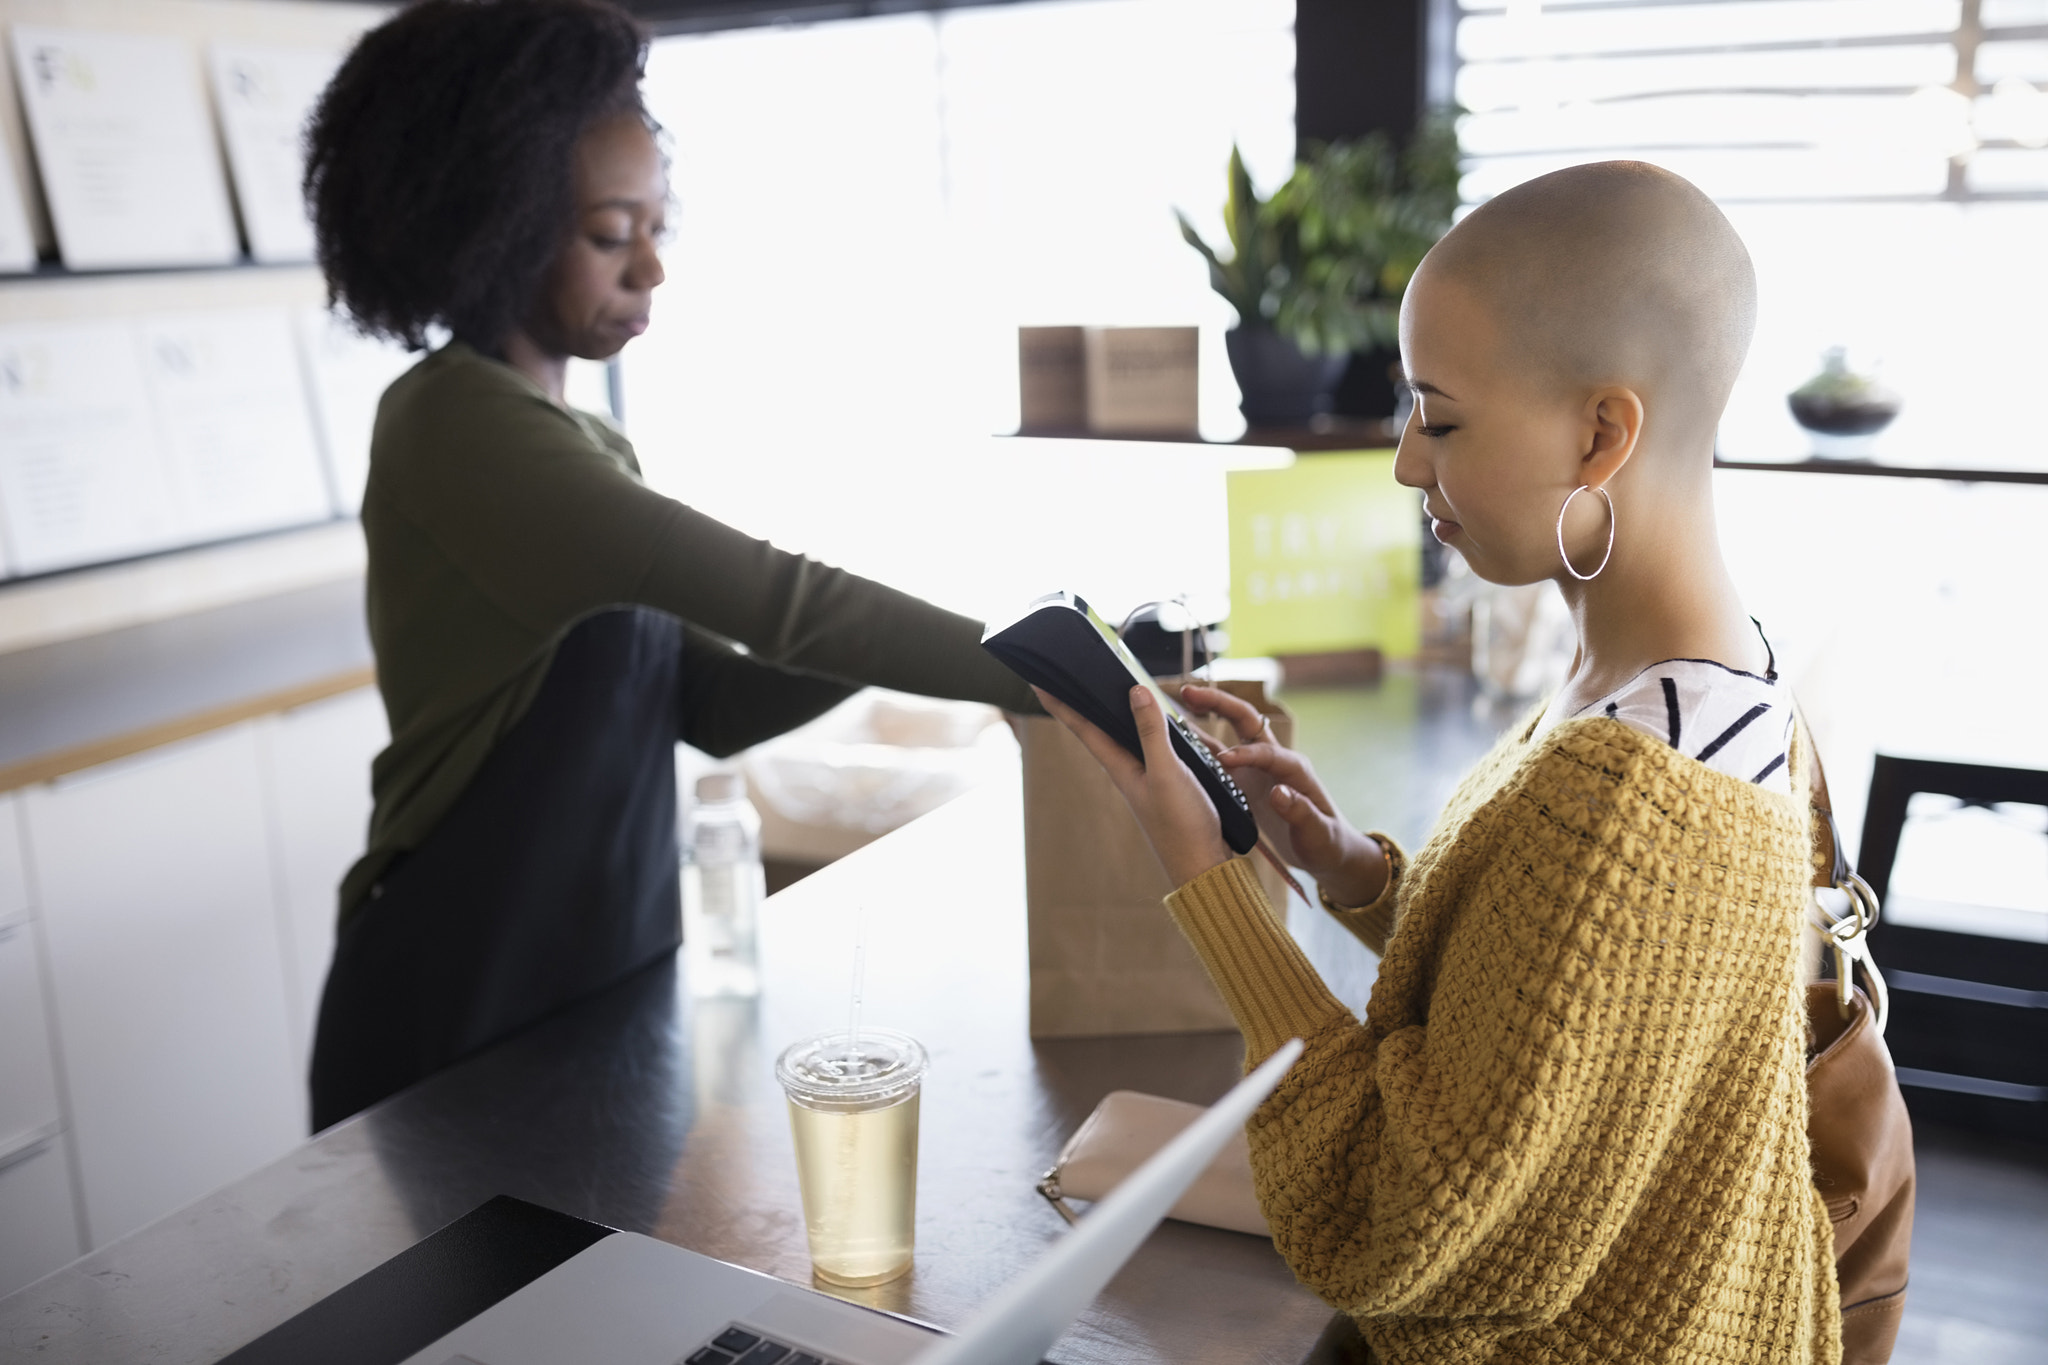 Young woman with shaved head using credit card reader at juice bar